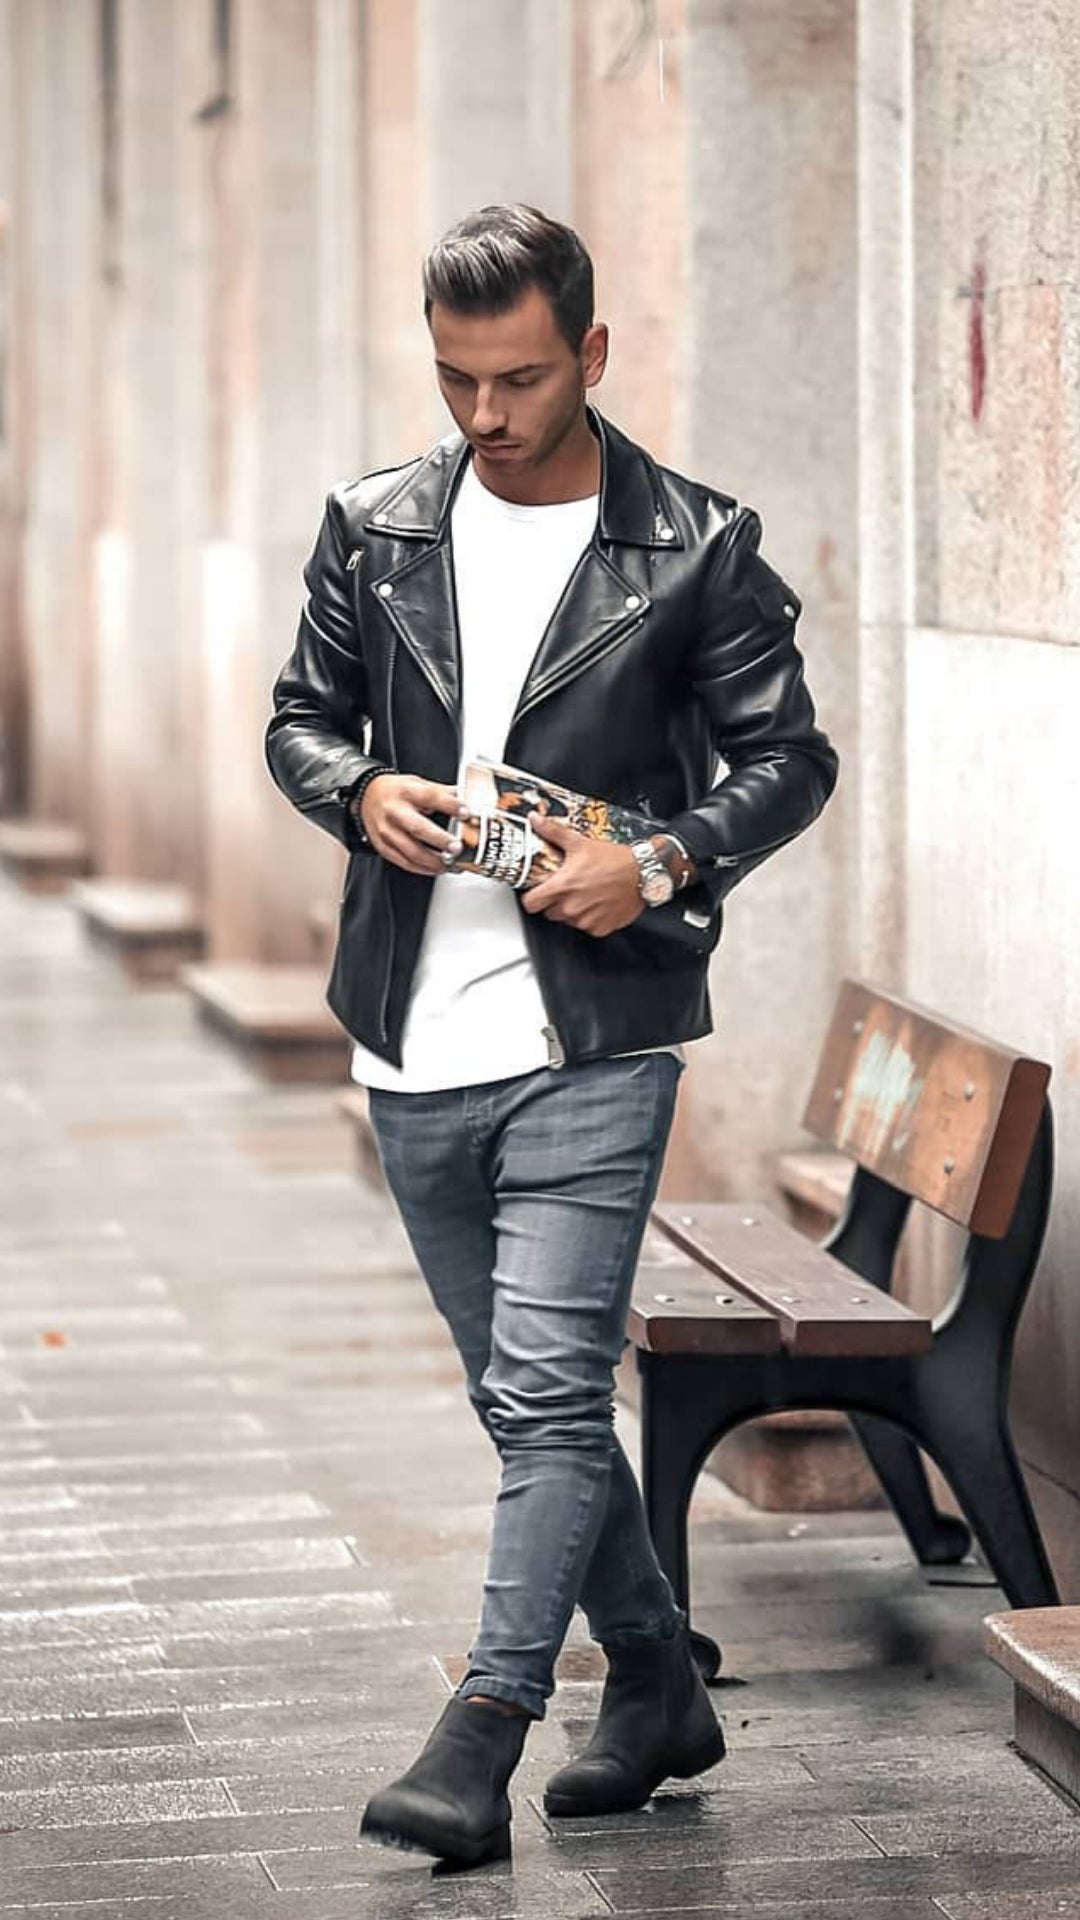 5 Coolest Looks To Steal From This Up-and-Coming Street Style Star #street #style #mensfashion